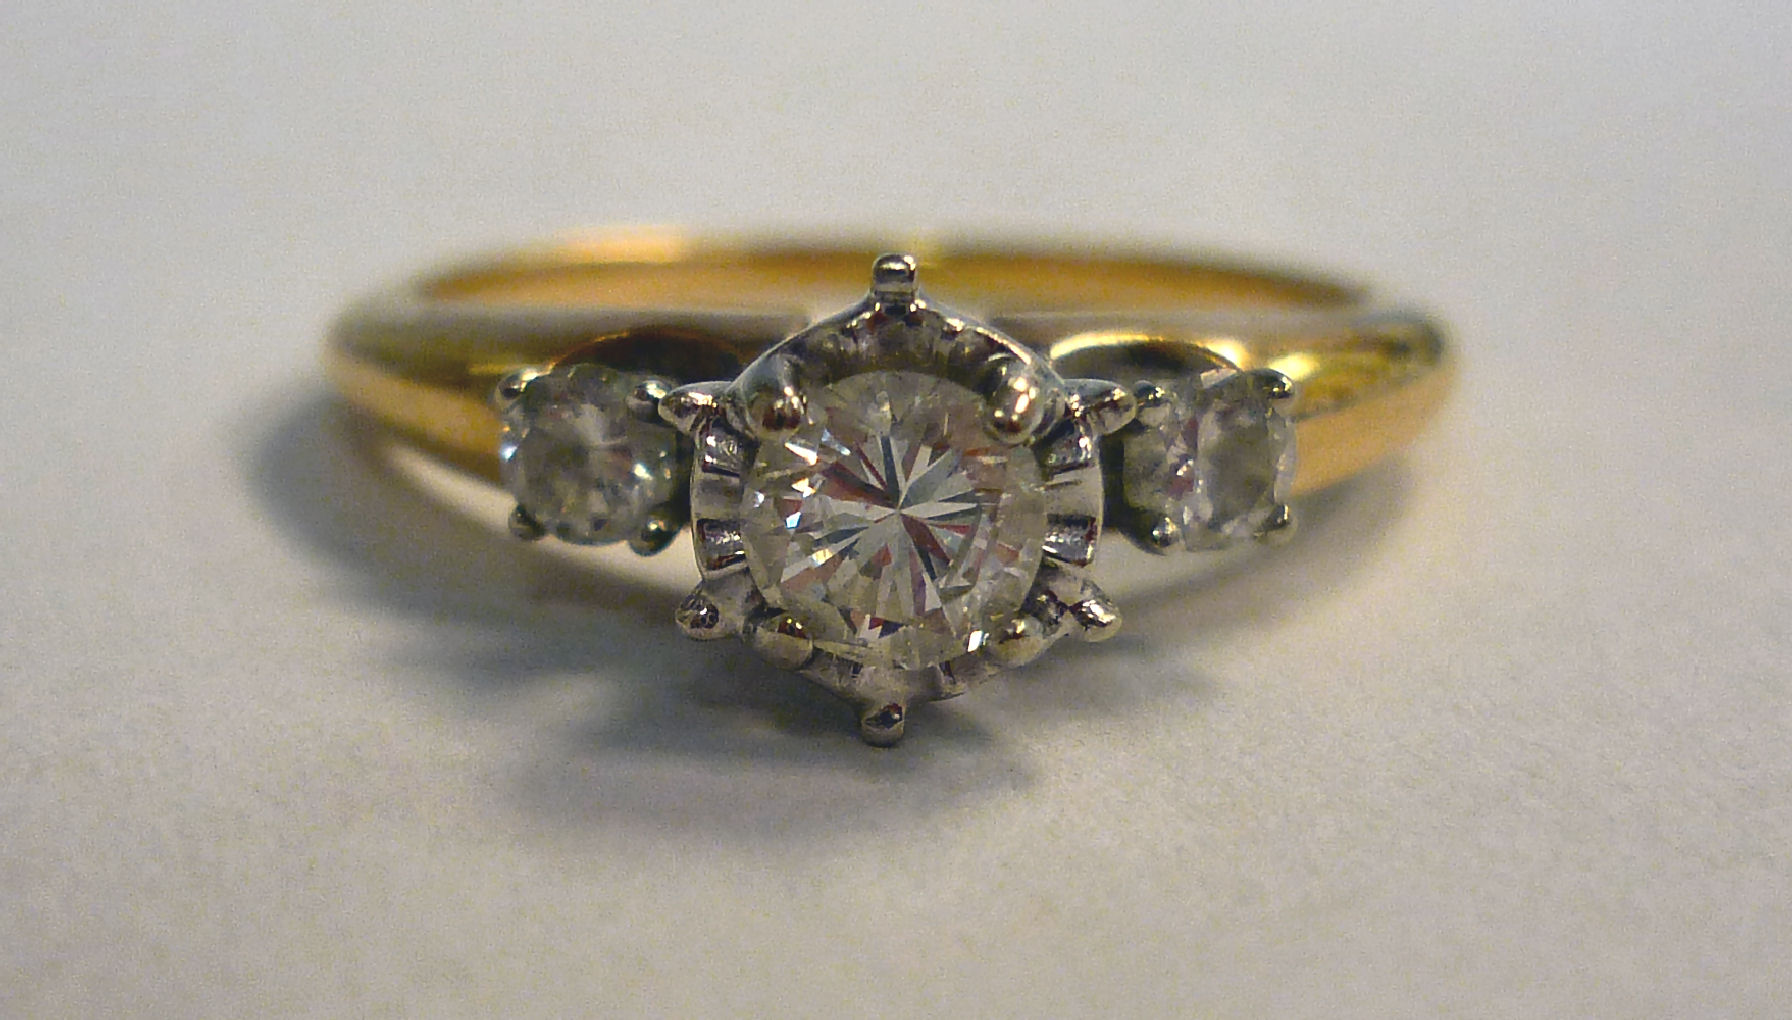 A 14ct gold ring with an illusion set diamond, between diamond shoulders